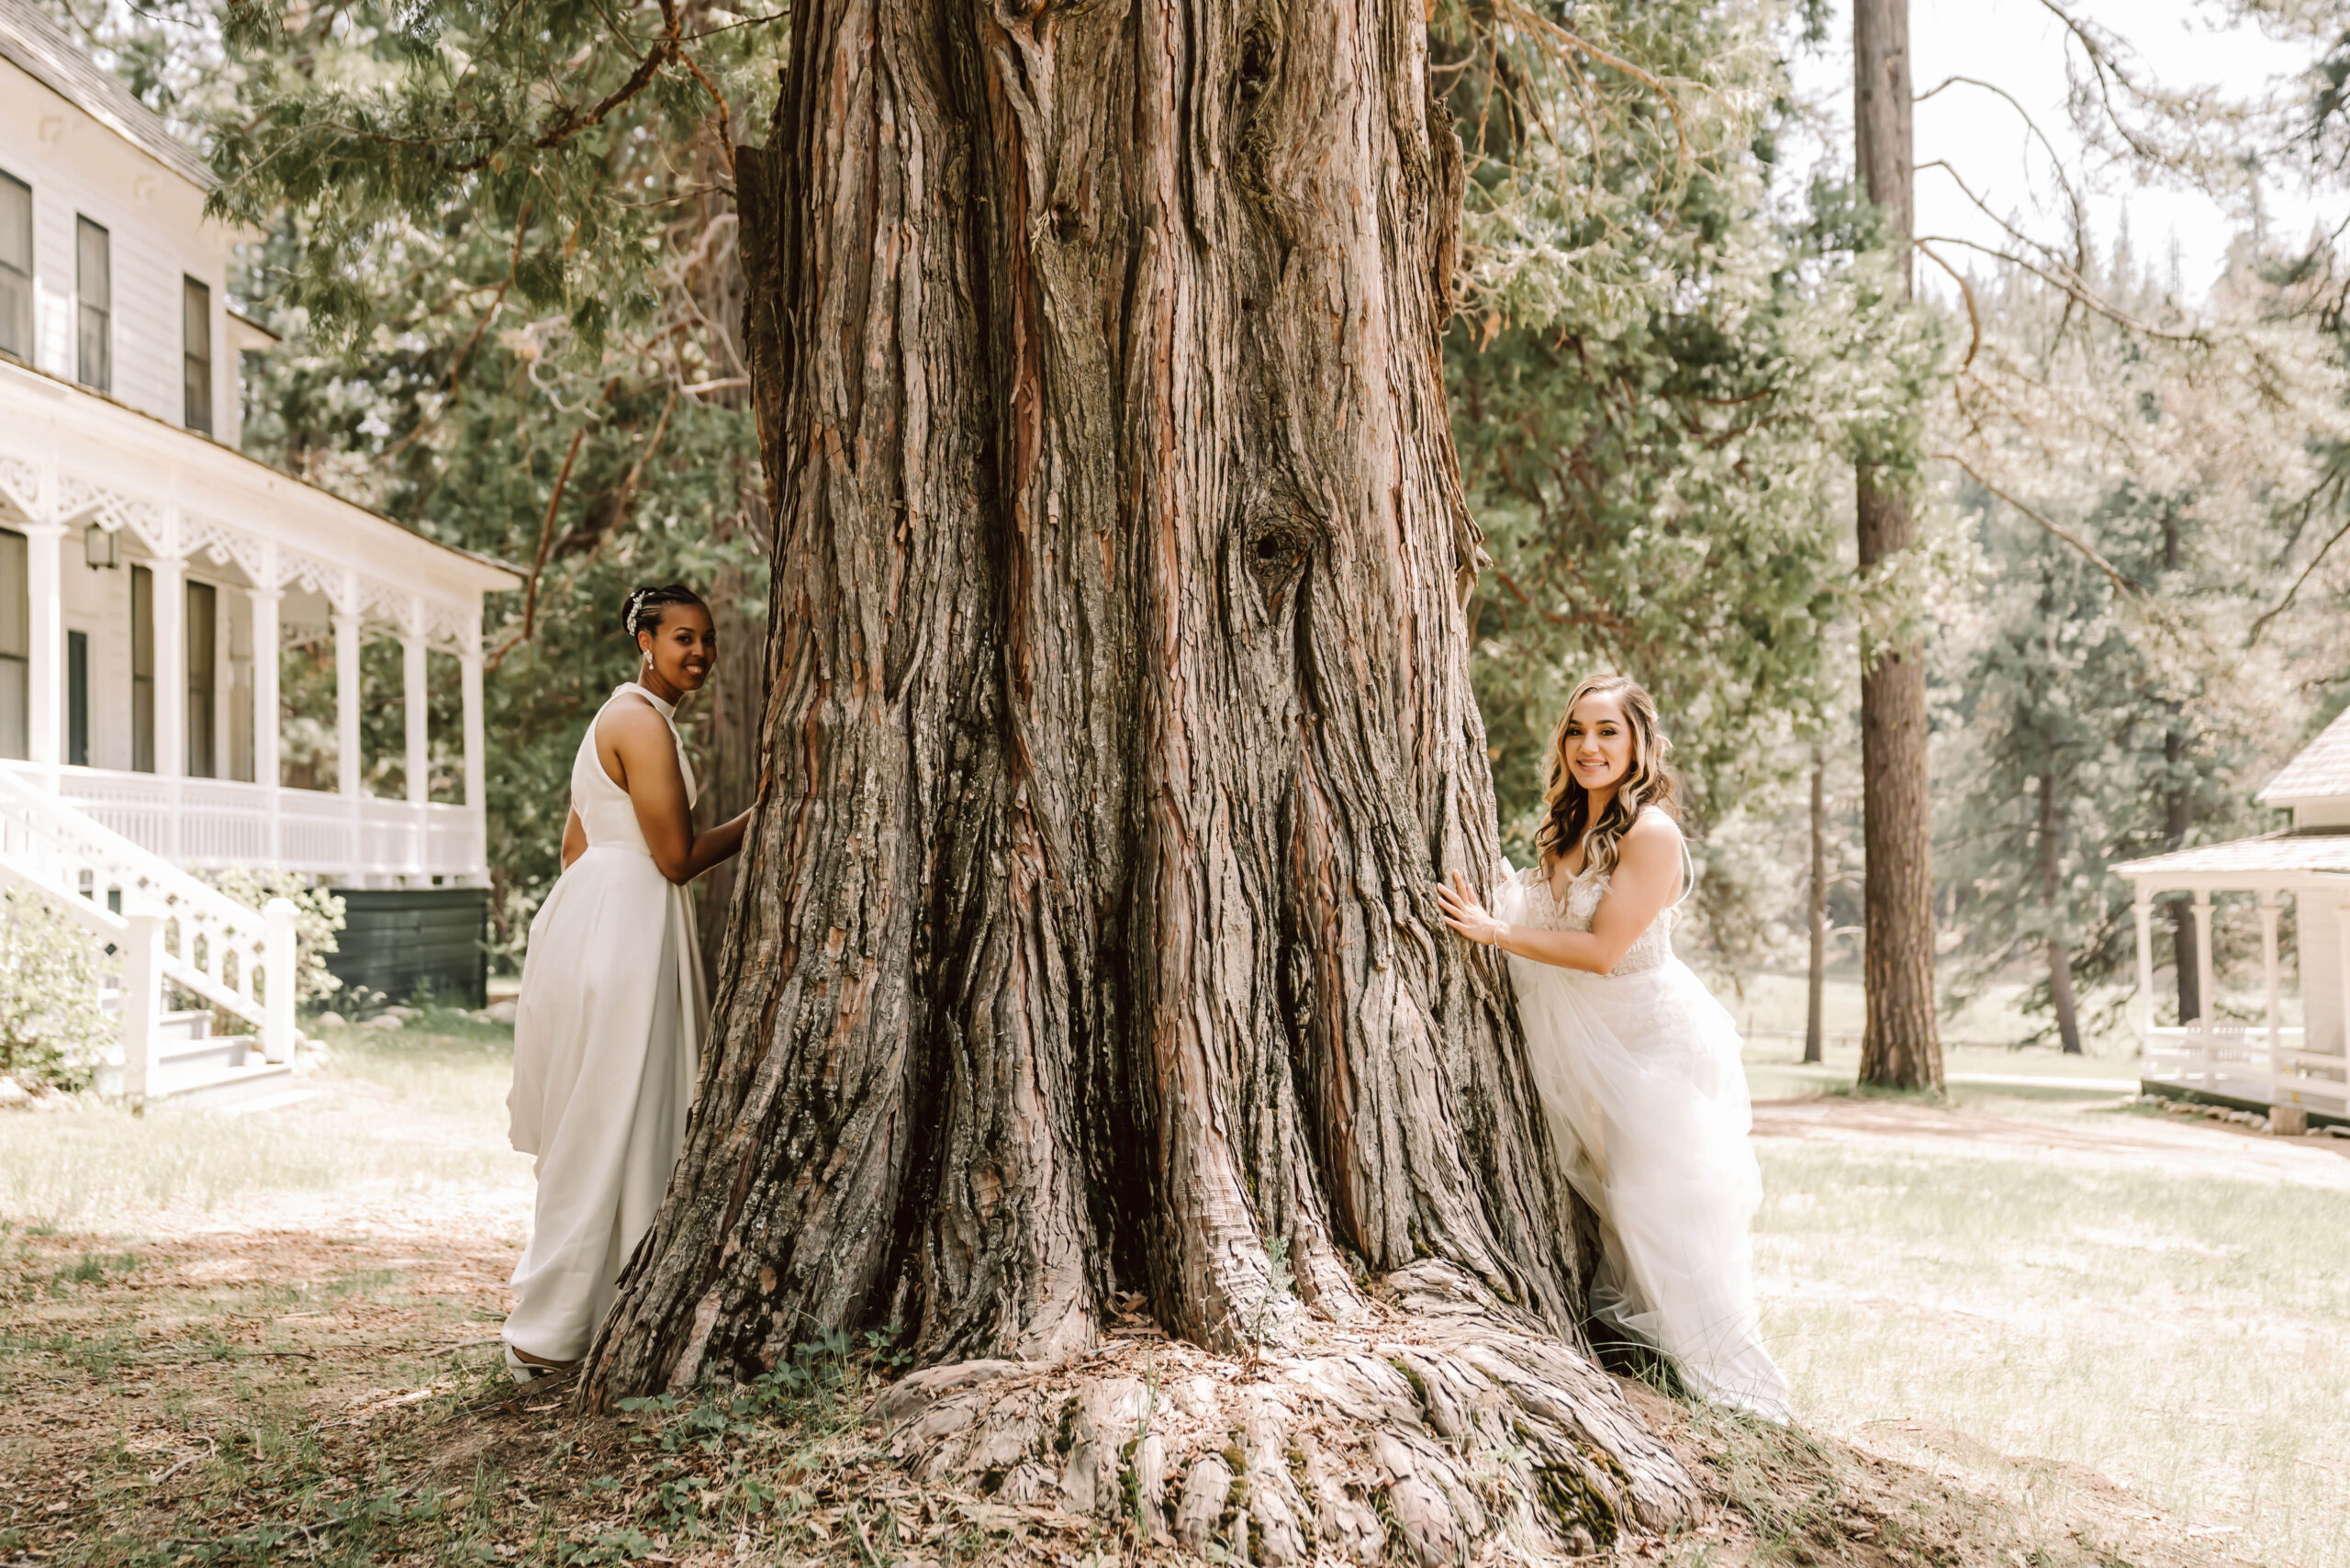 Two brides hiding behind a big tree getting ready for their first look at for their Yosemite Elopement